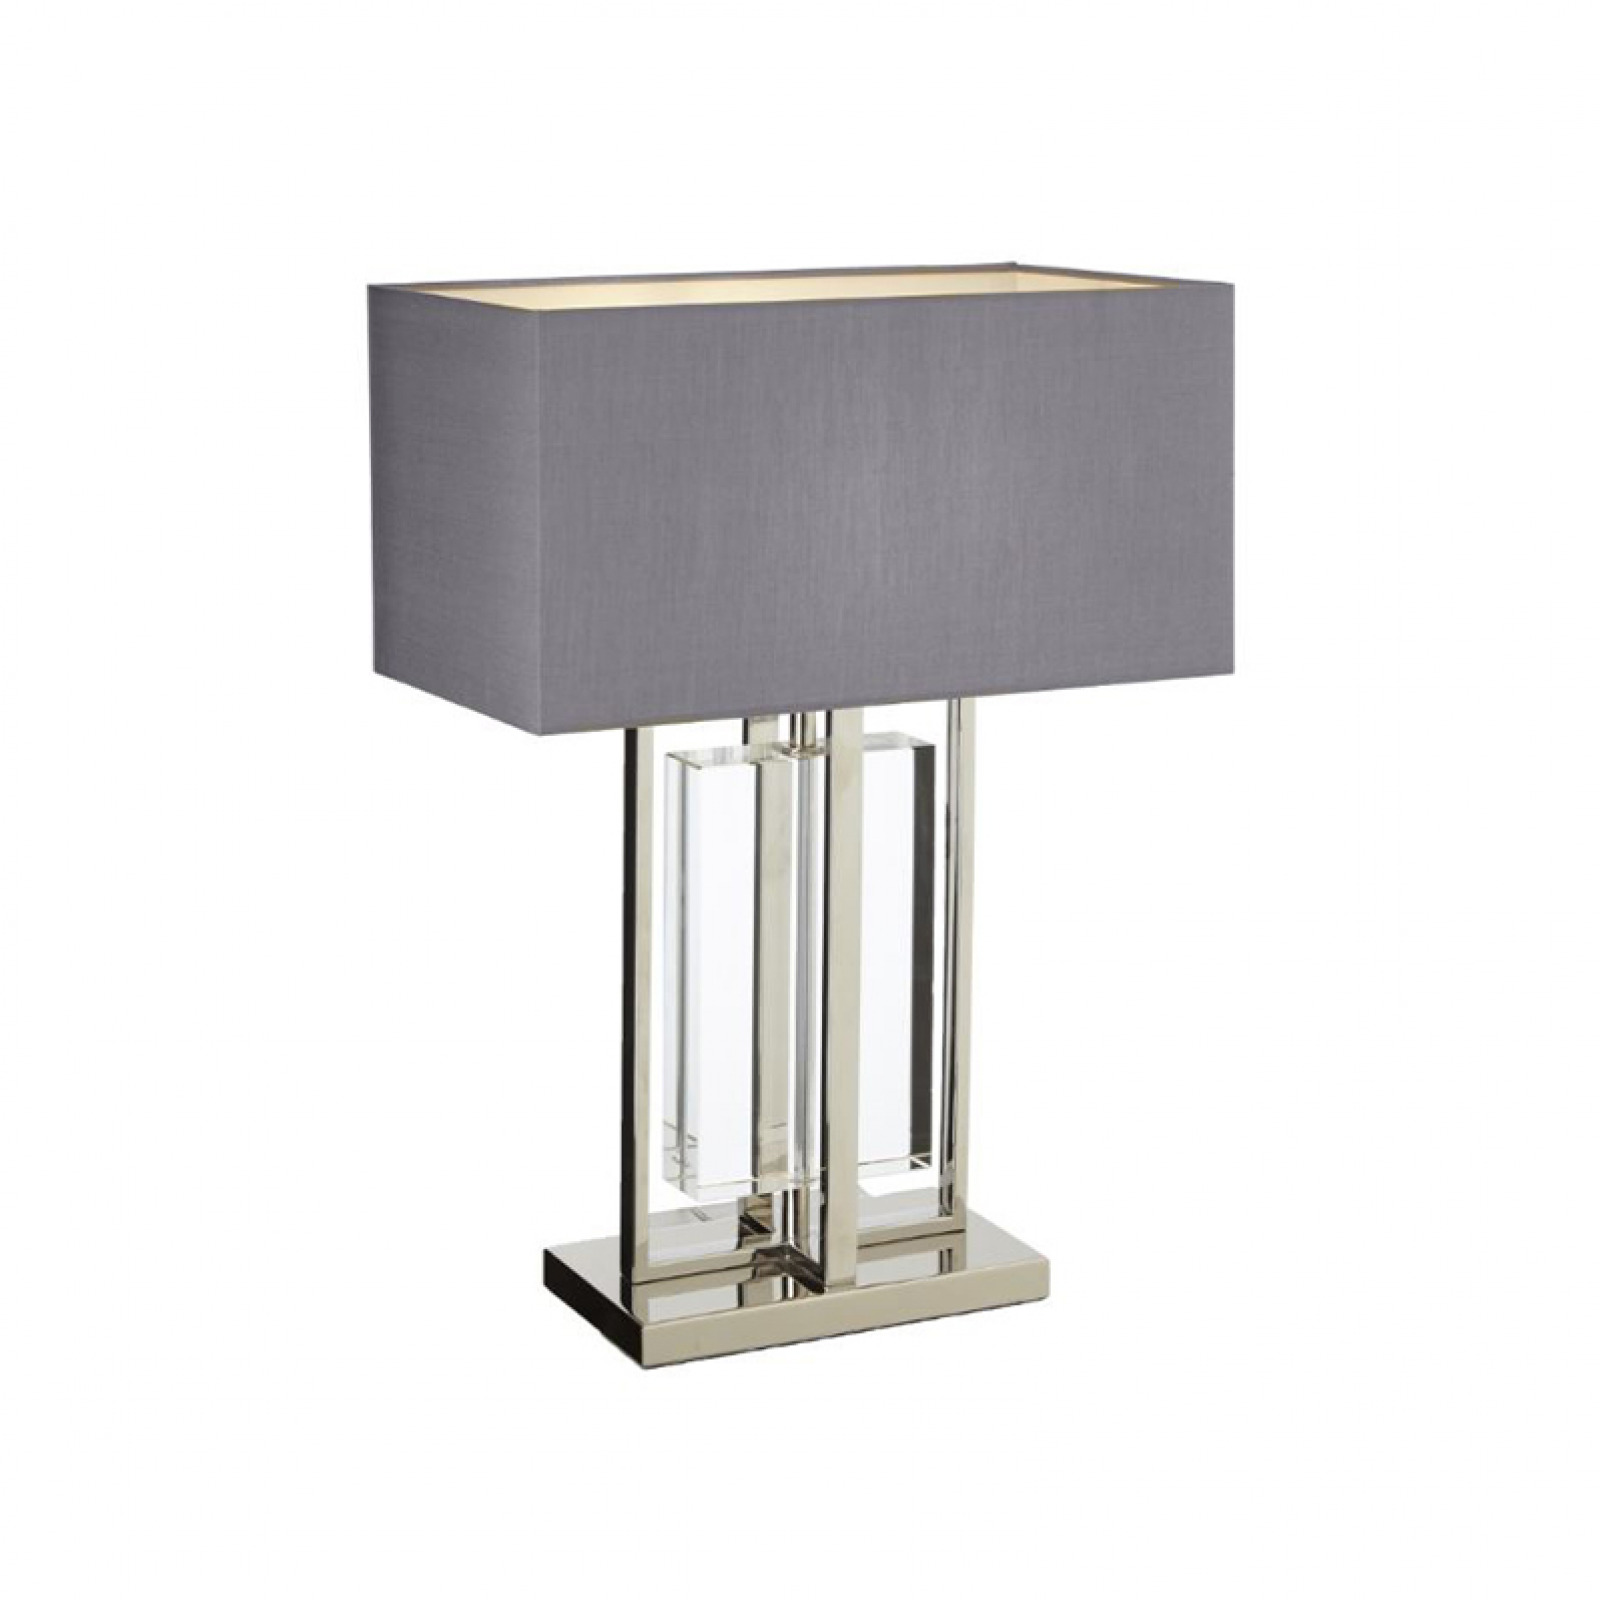 Sarre table lamp